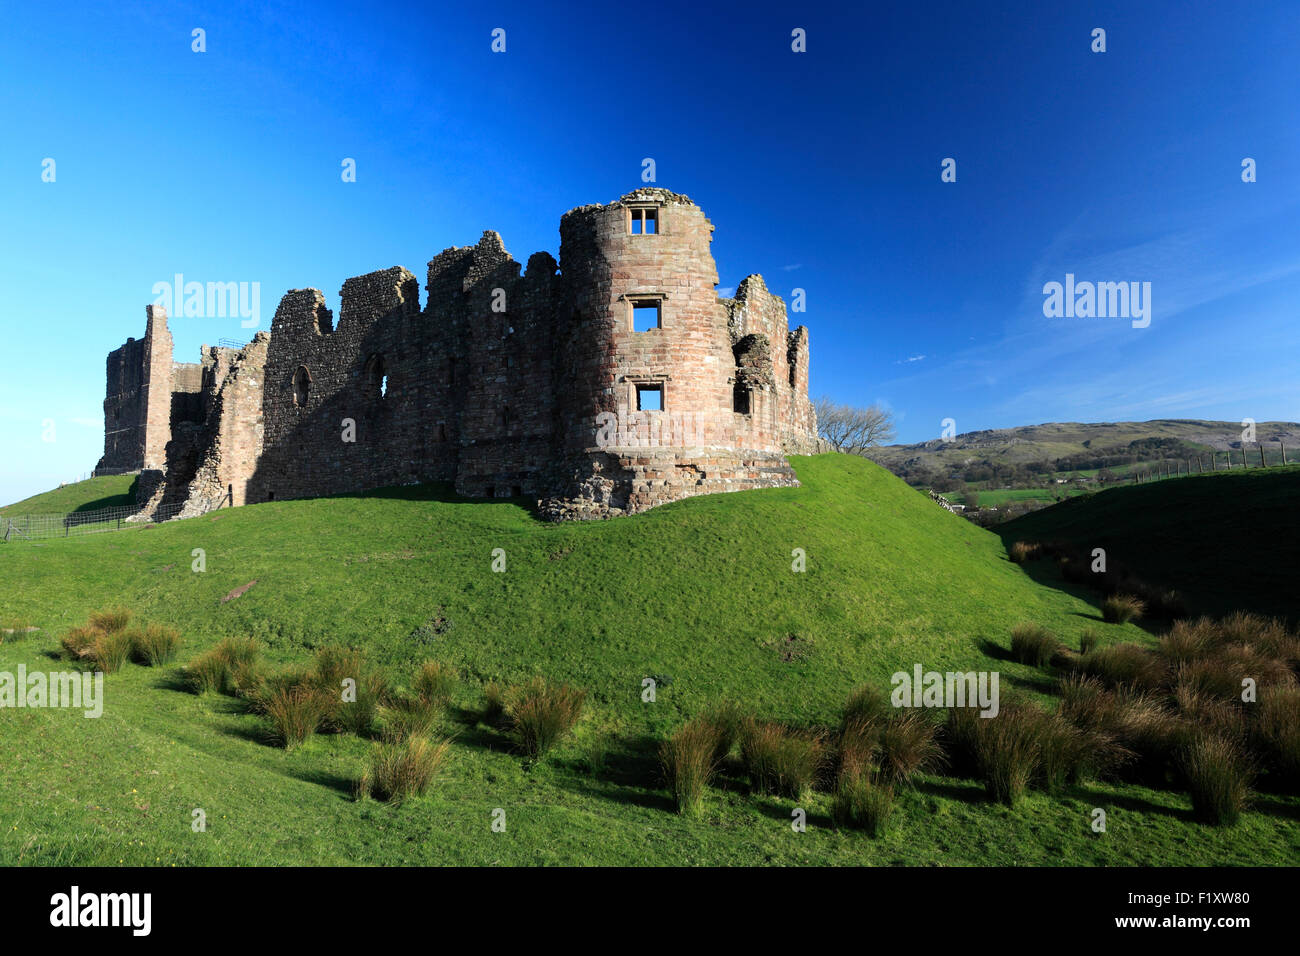 The ruins of Brough Castle, English Heritage, Cumbria County, England ...